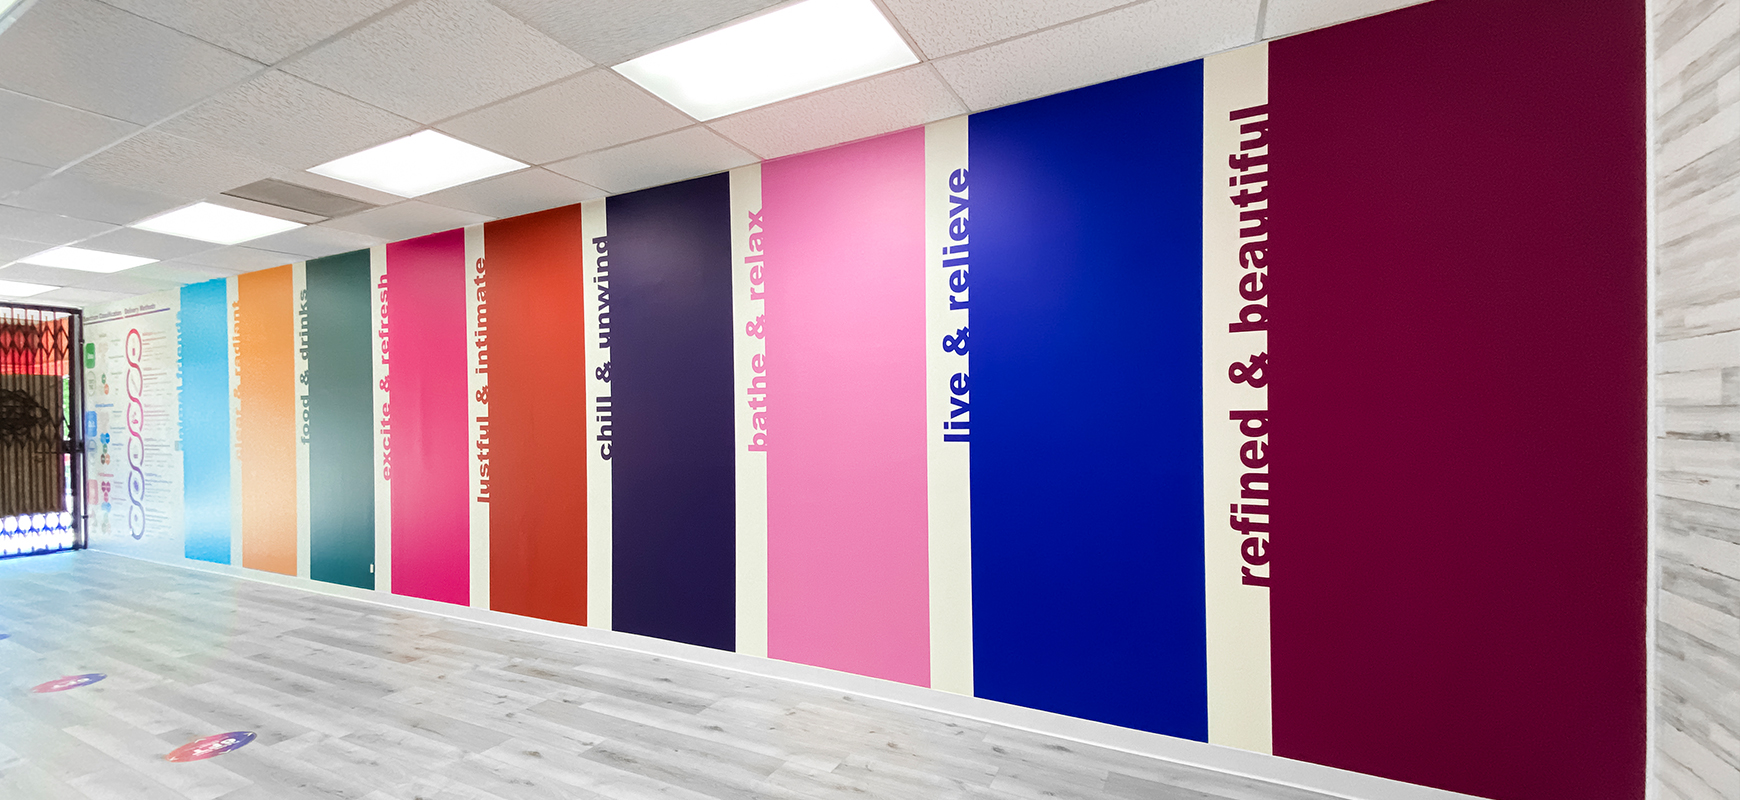 Colorful custom vinyl wall decals displaying positive words made of opaque vinyl